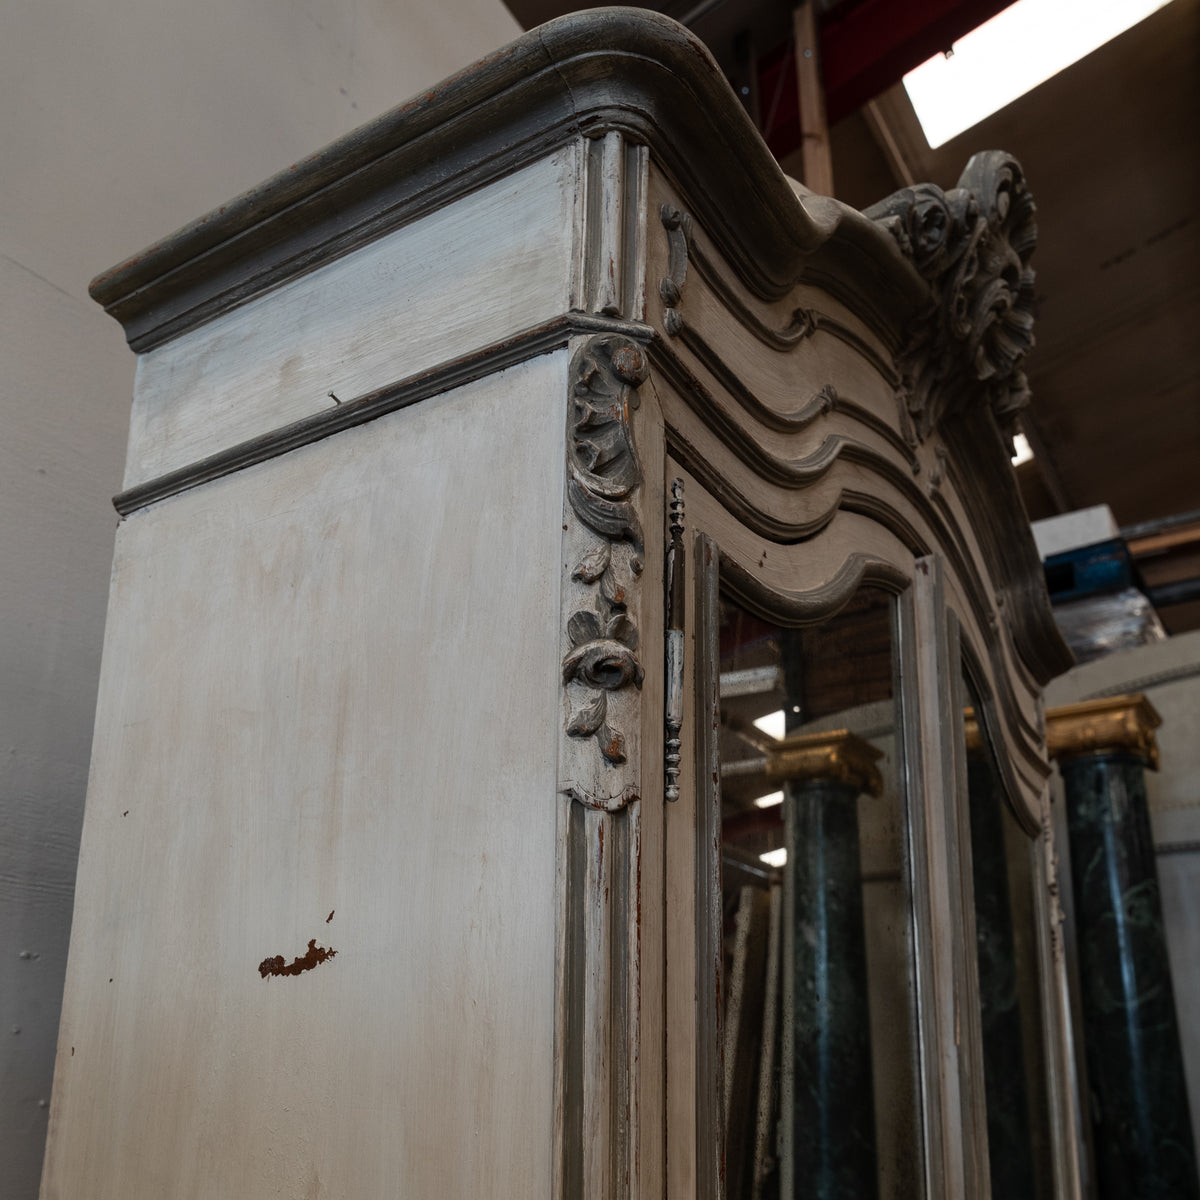 Antique French Carved Oak Louis XV Style Armoire with Mirrored Doors | The Architectural Forum